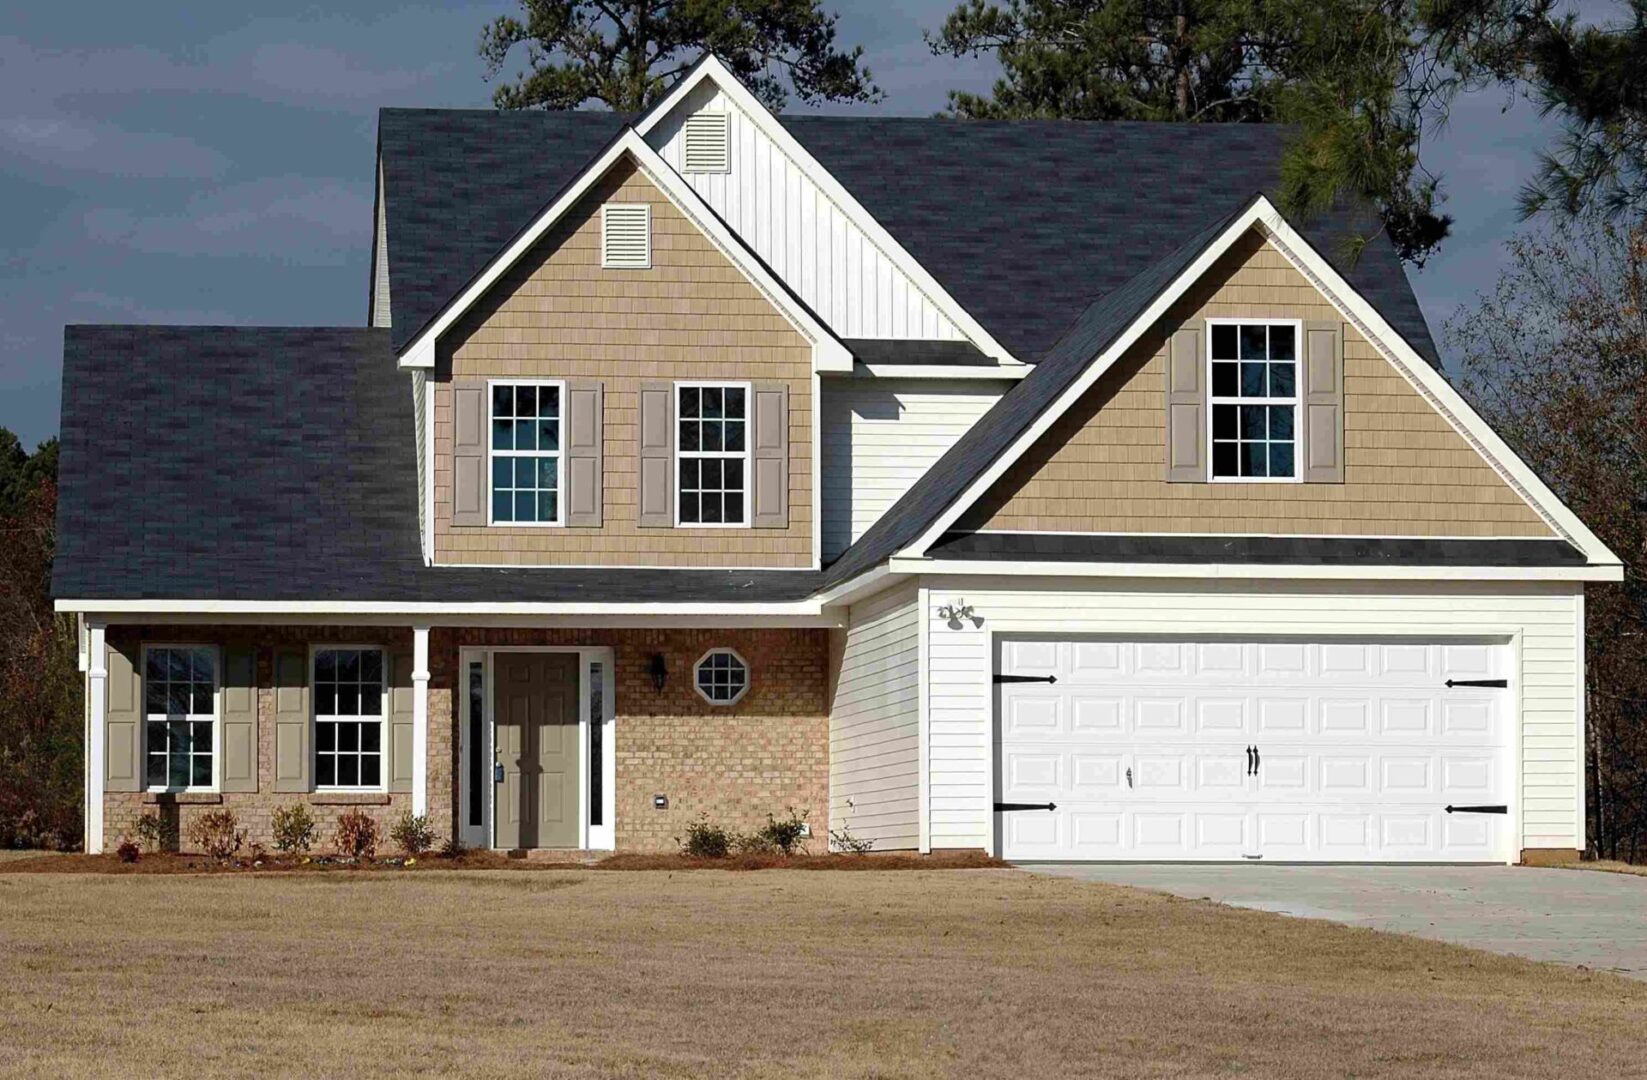 A house with two garage doors and a driveway.